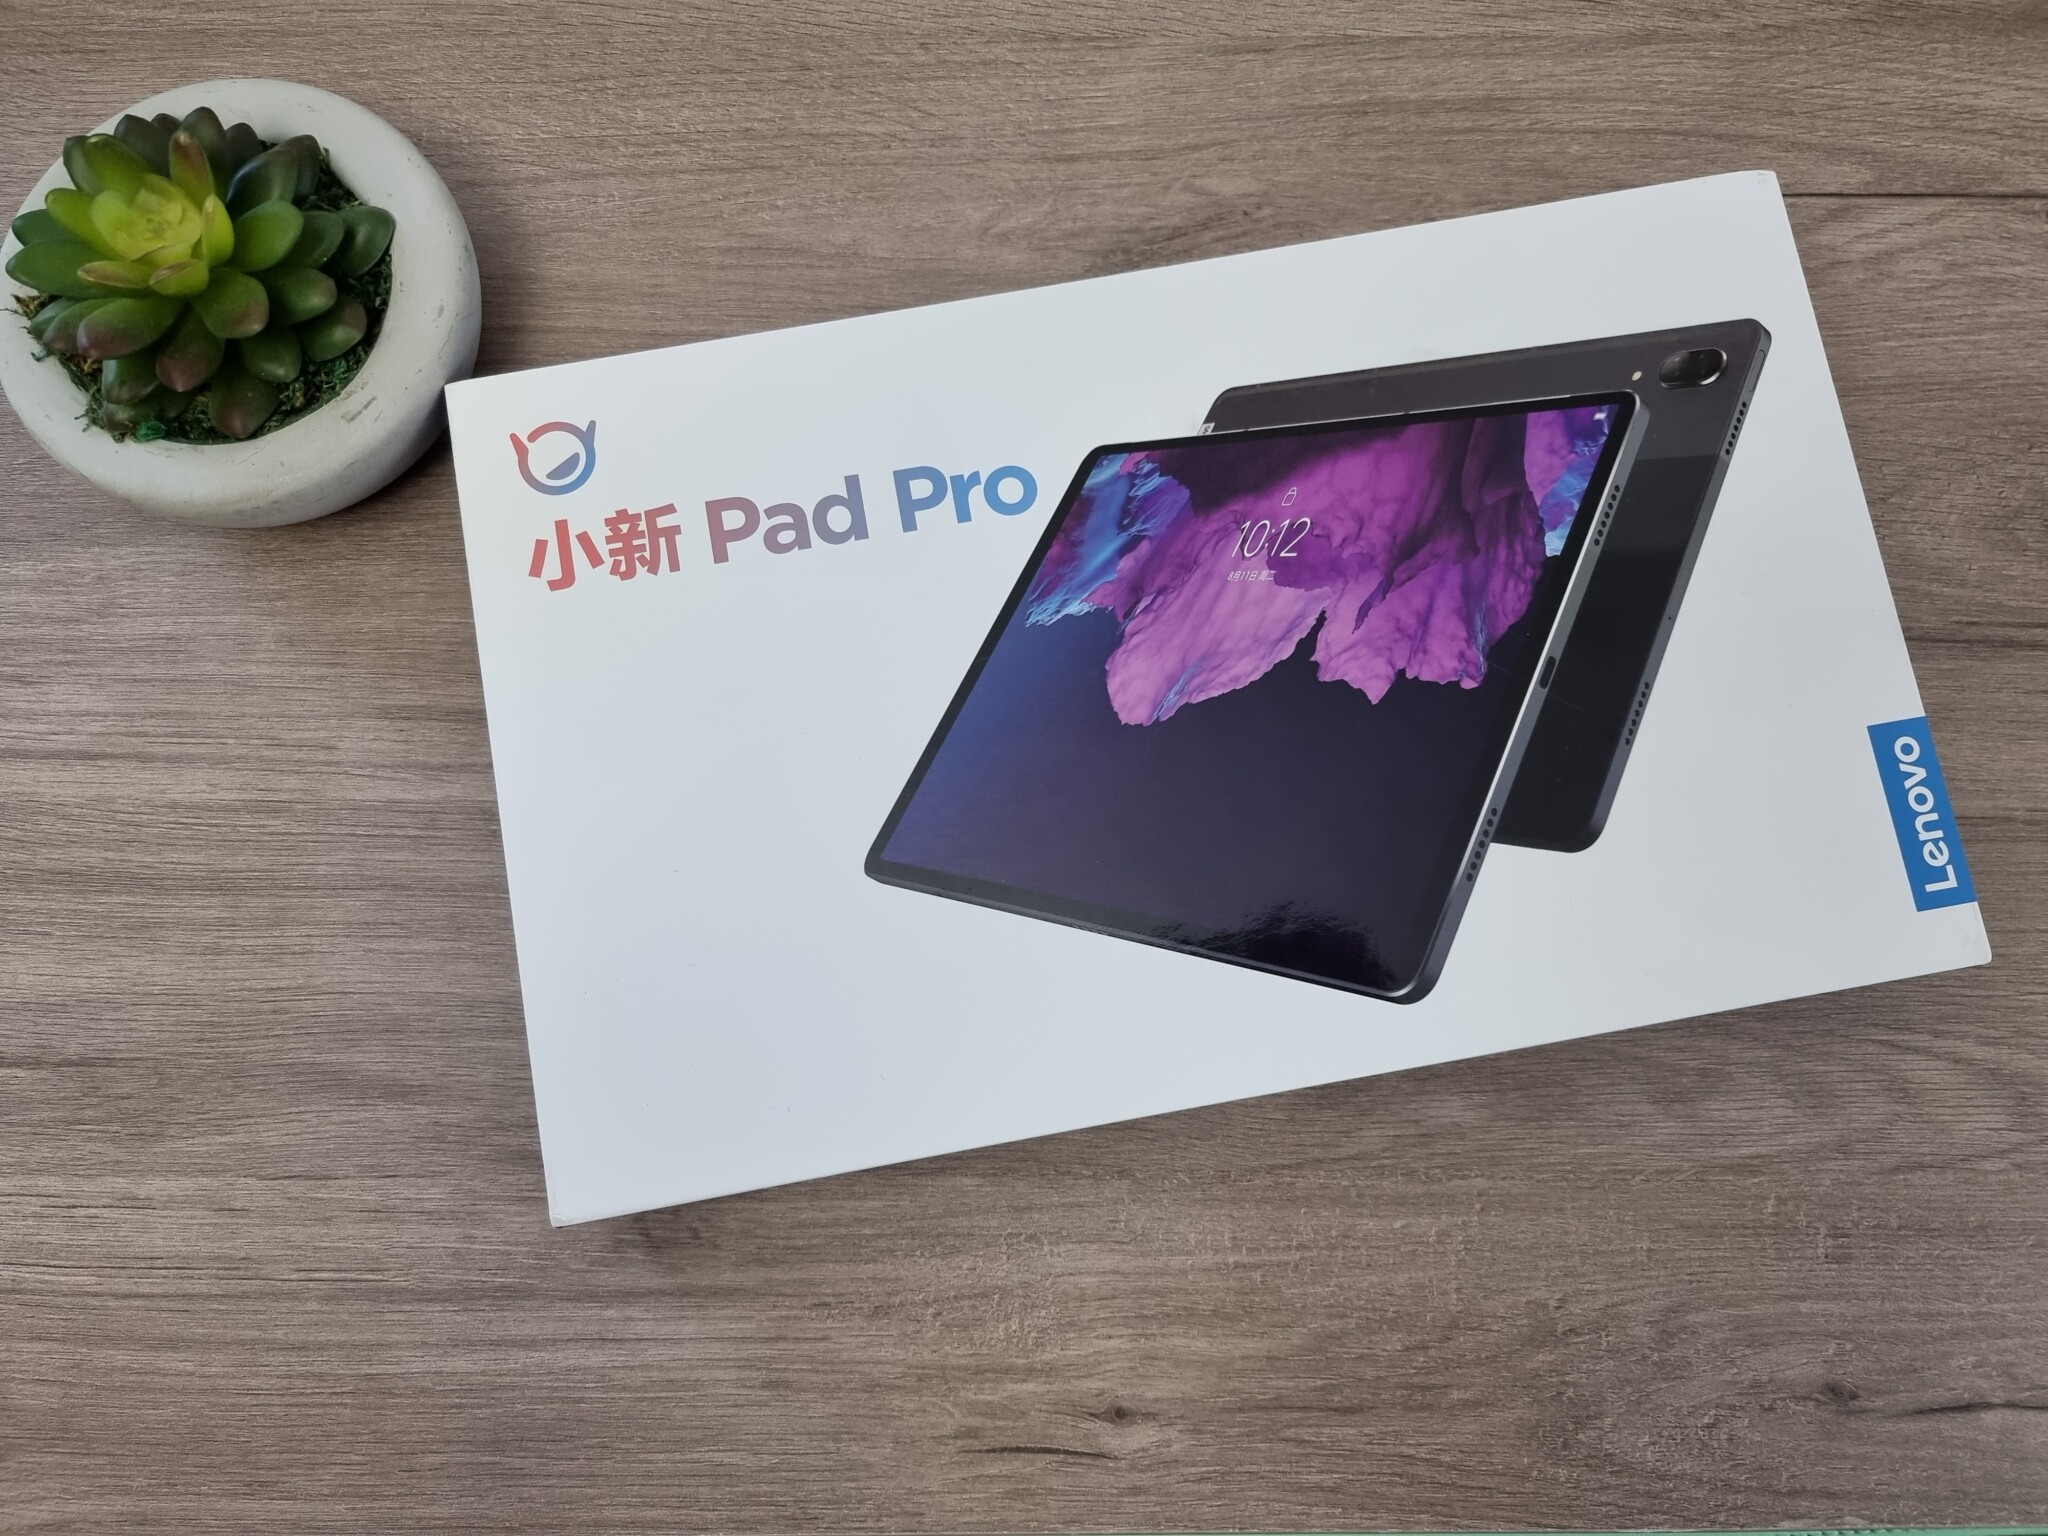 Lenovo XiaoXin Pad Pro Review Why Pay More For The Lenovo P11 Pro?